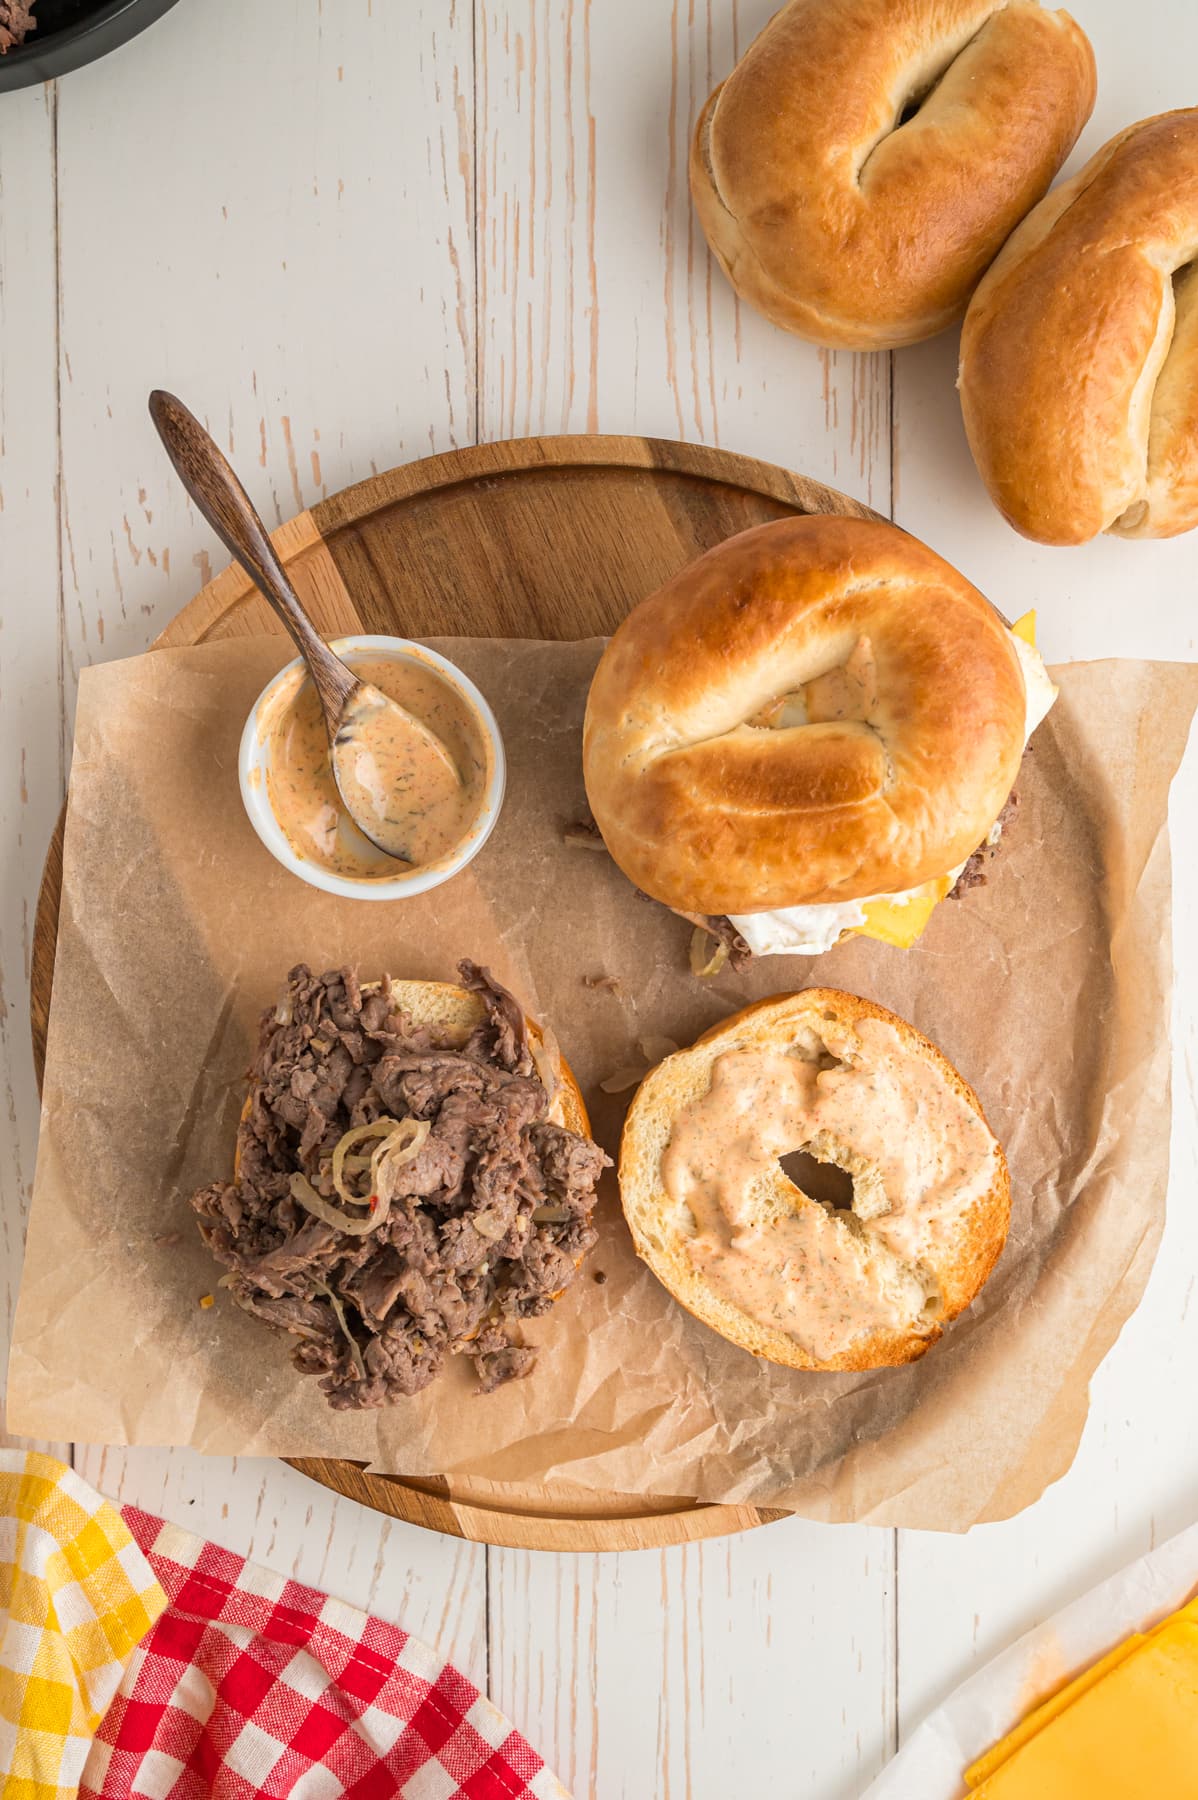 steak egg and cheese bagels on wooden board